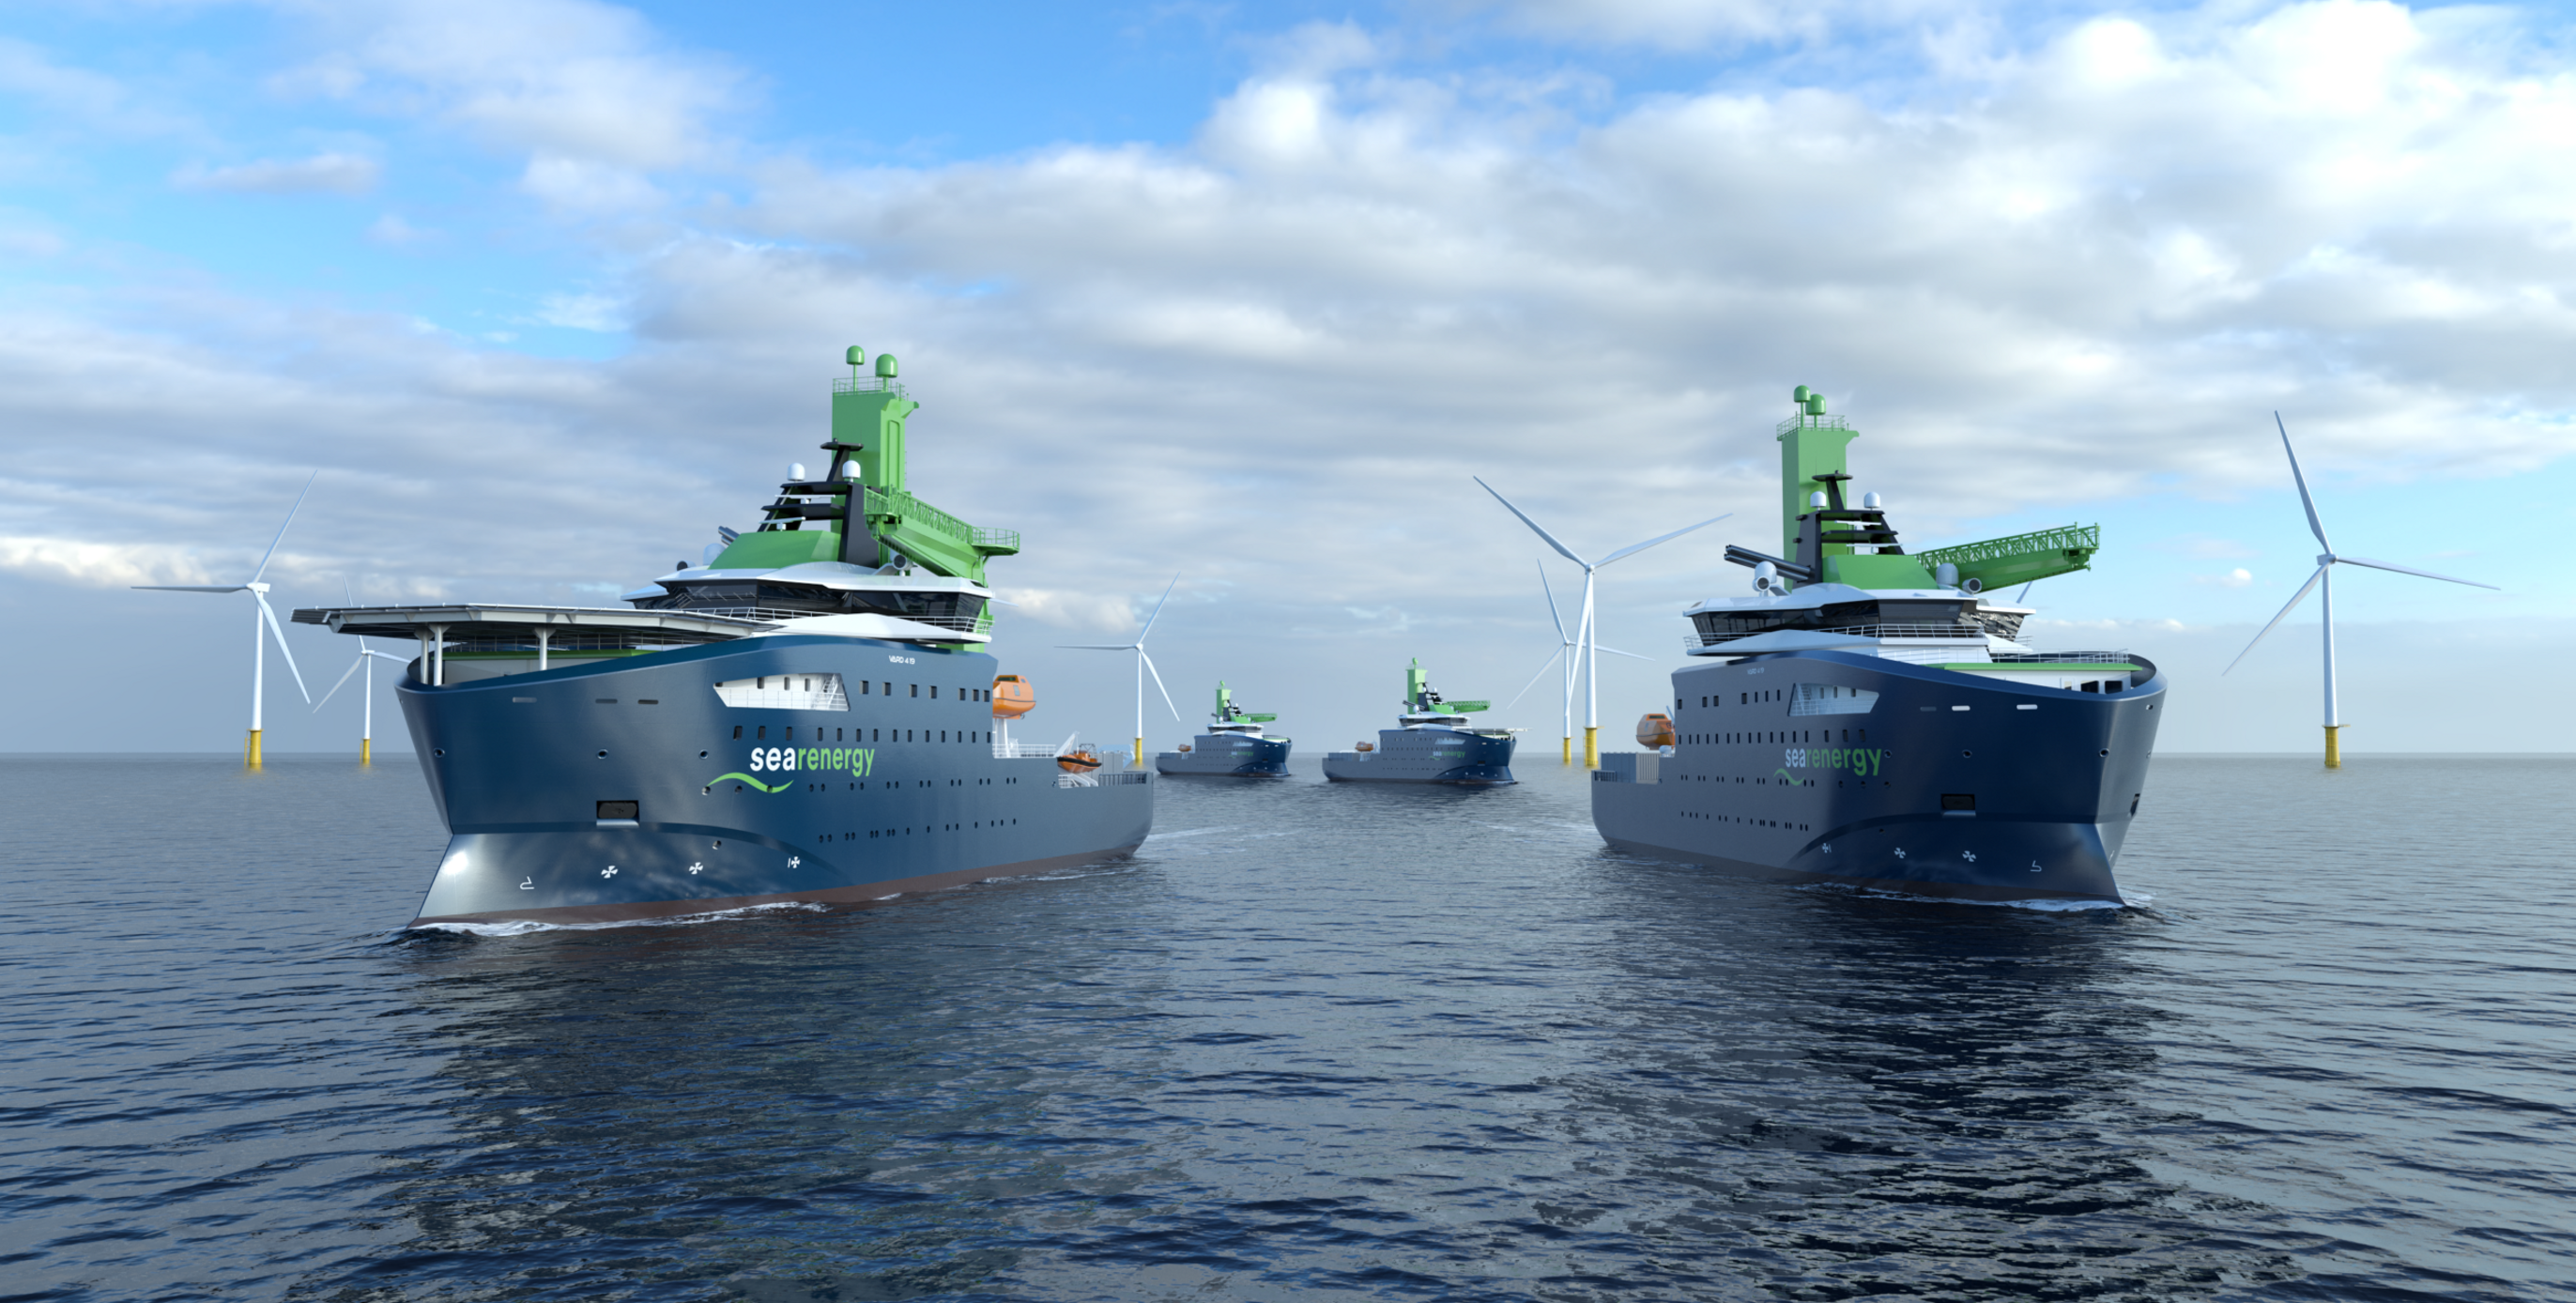 VARD has signed a contract for two hybrid Commissioning Service Operation Vessels